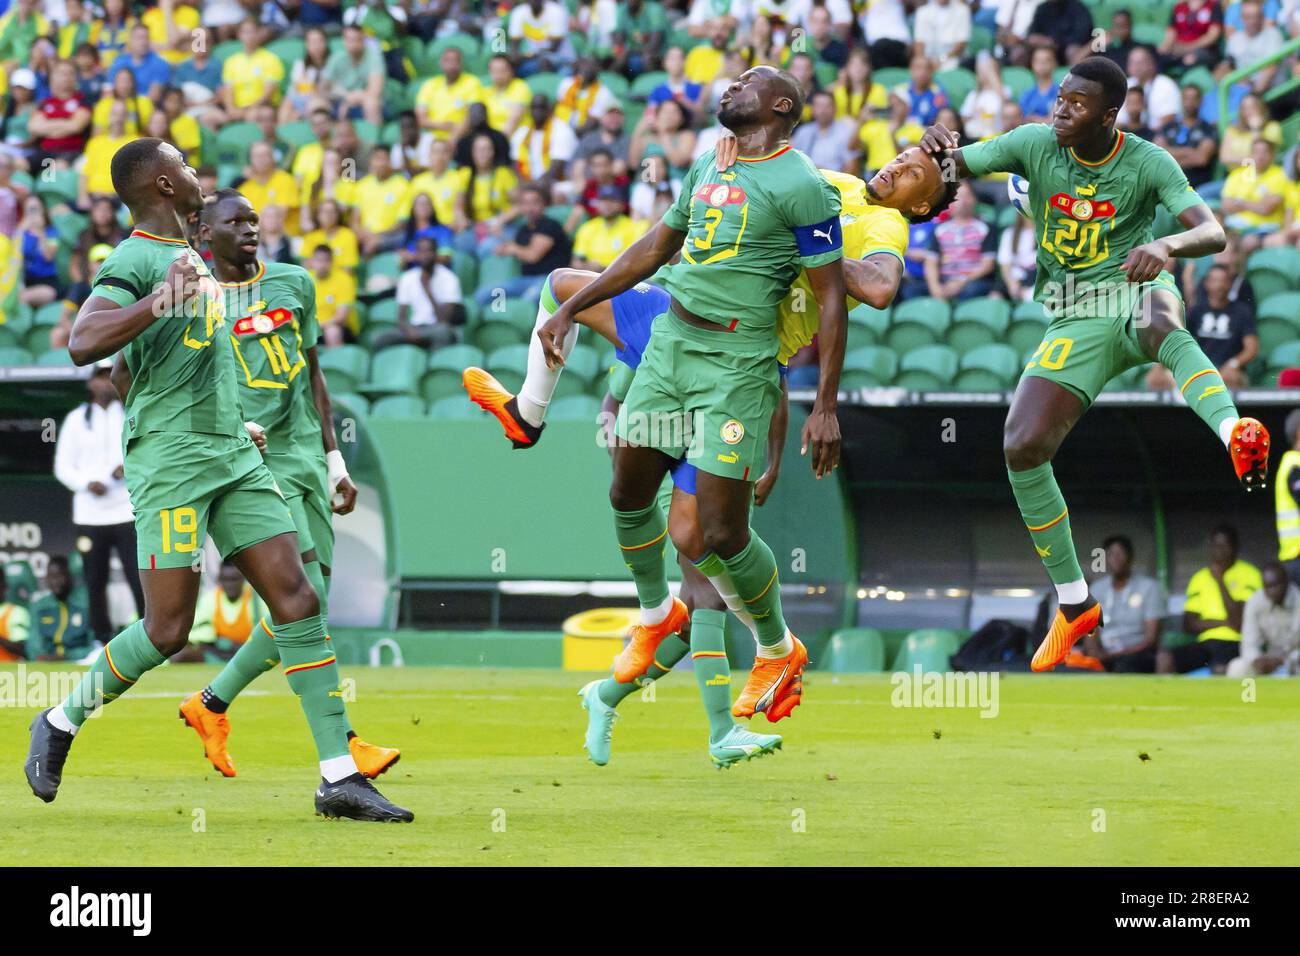 Lisbon, Portugal  June 20, 2023, Eder Militao of Brazil in duel with Kalidou Koulibaly, Pape Gueye of Senegal during the International Friendly Football match between Brazil and Senegal on June 20, 2023 at Jose Alvalade stadium in Lisbon, Portugal Stock Photo